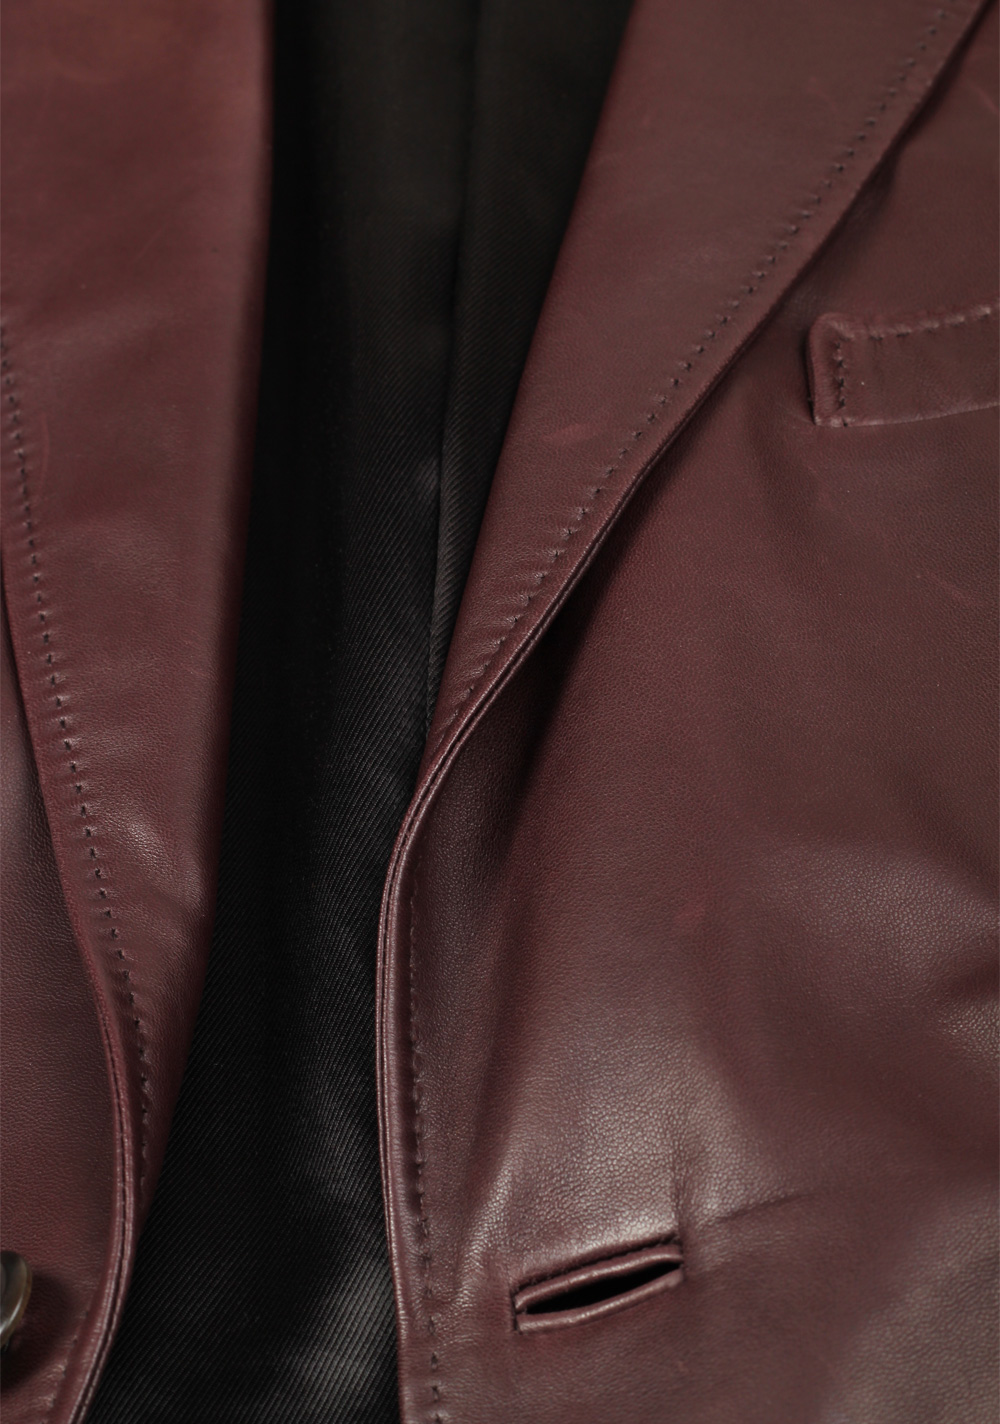 TOM FORD Brown Nappa Leather Jacket Coat | Costume Limité